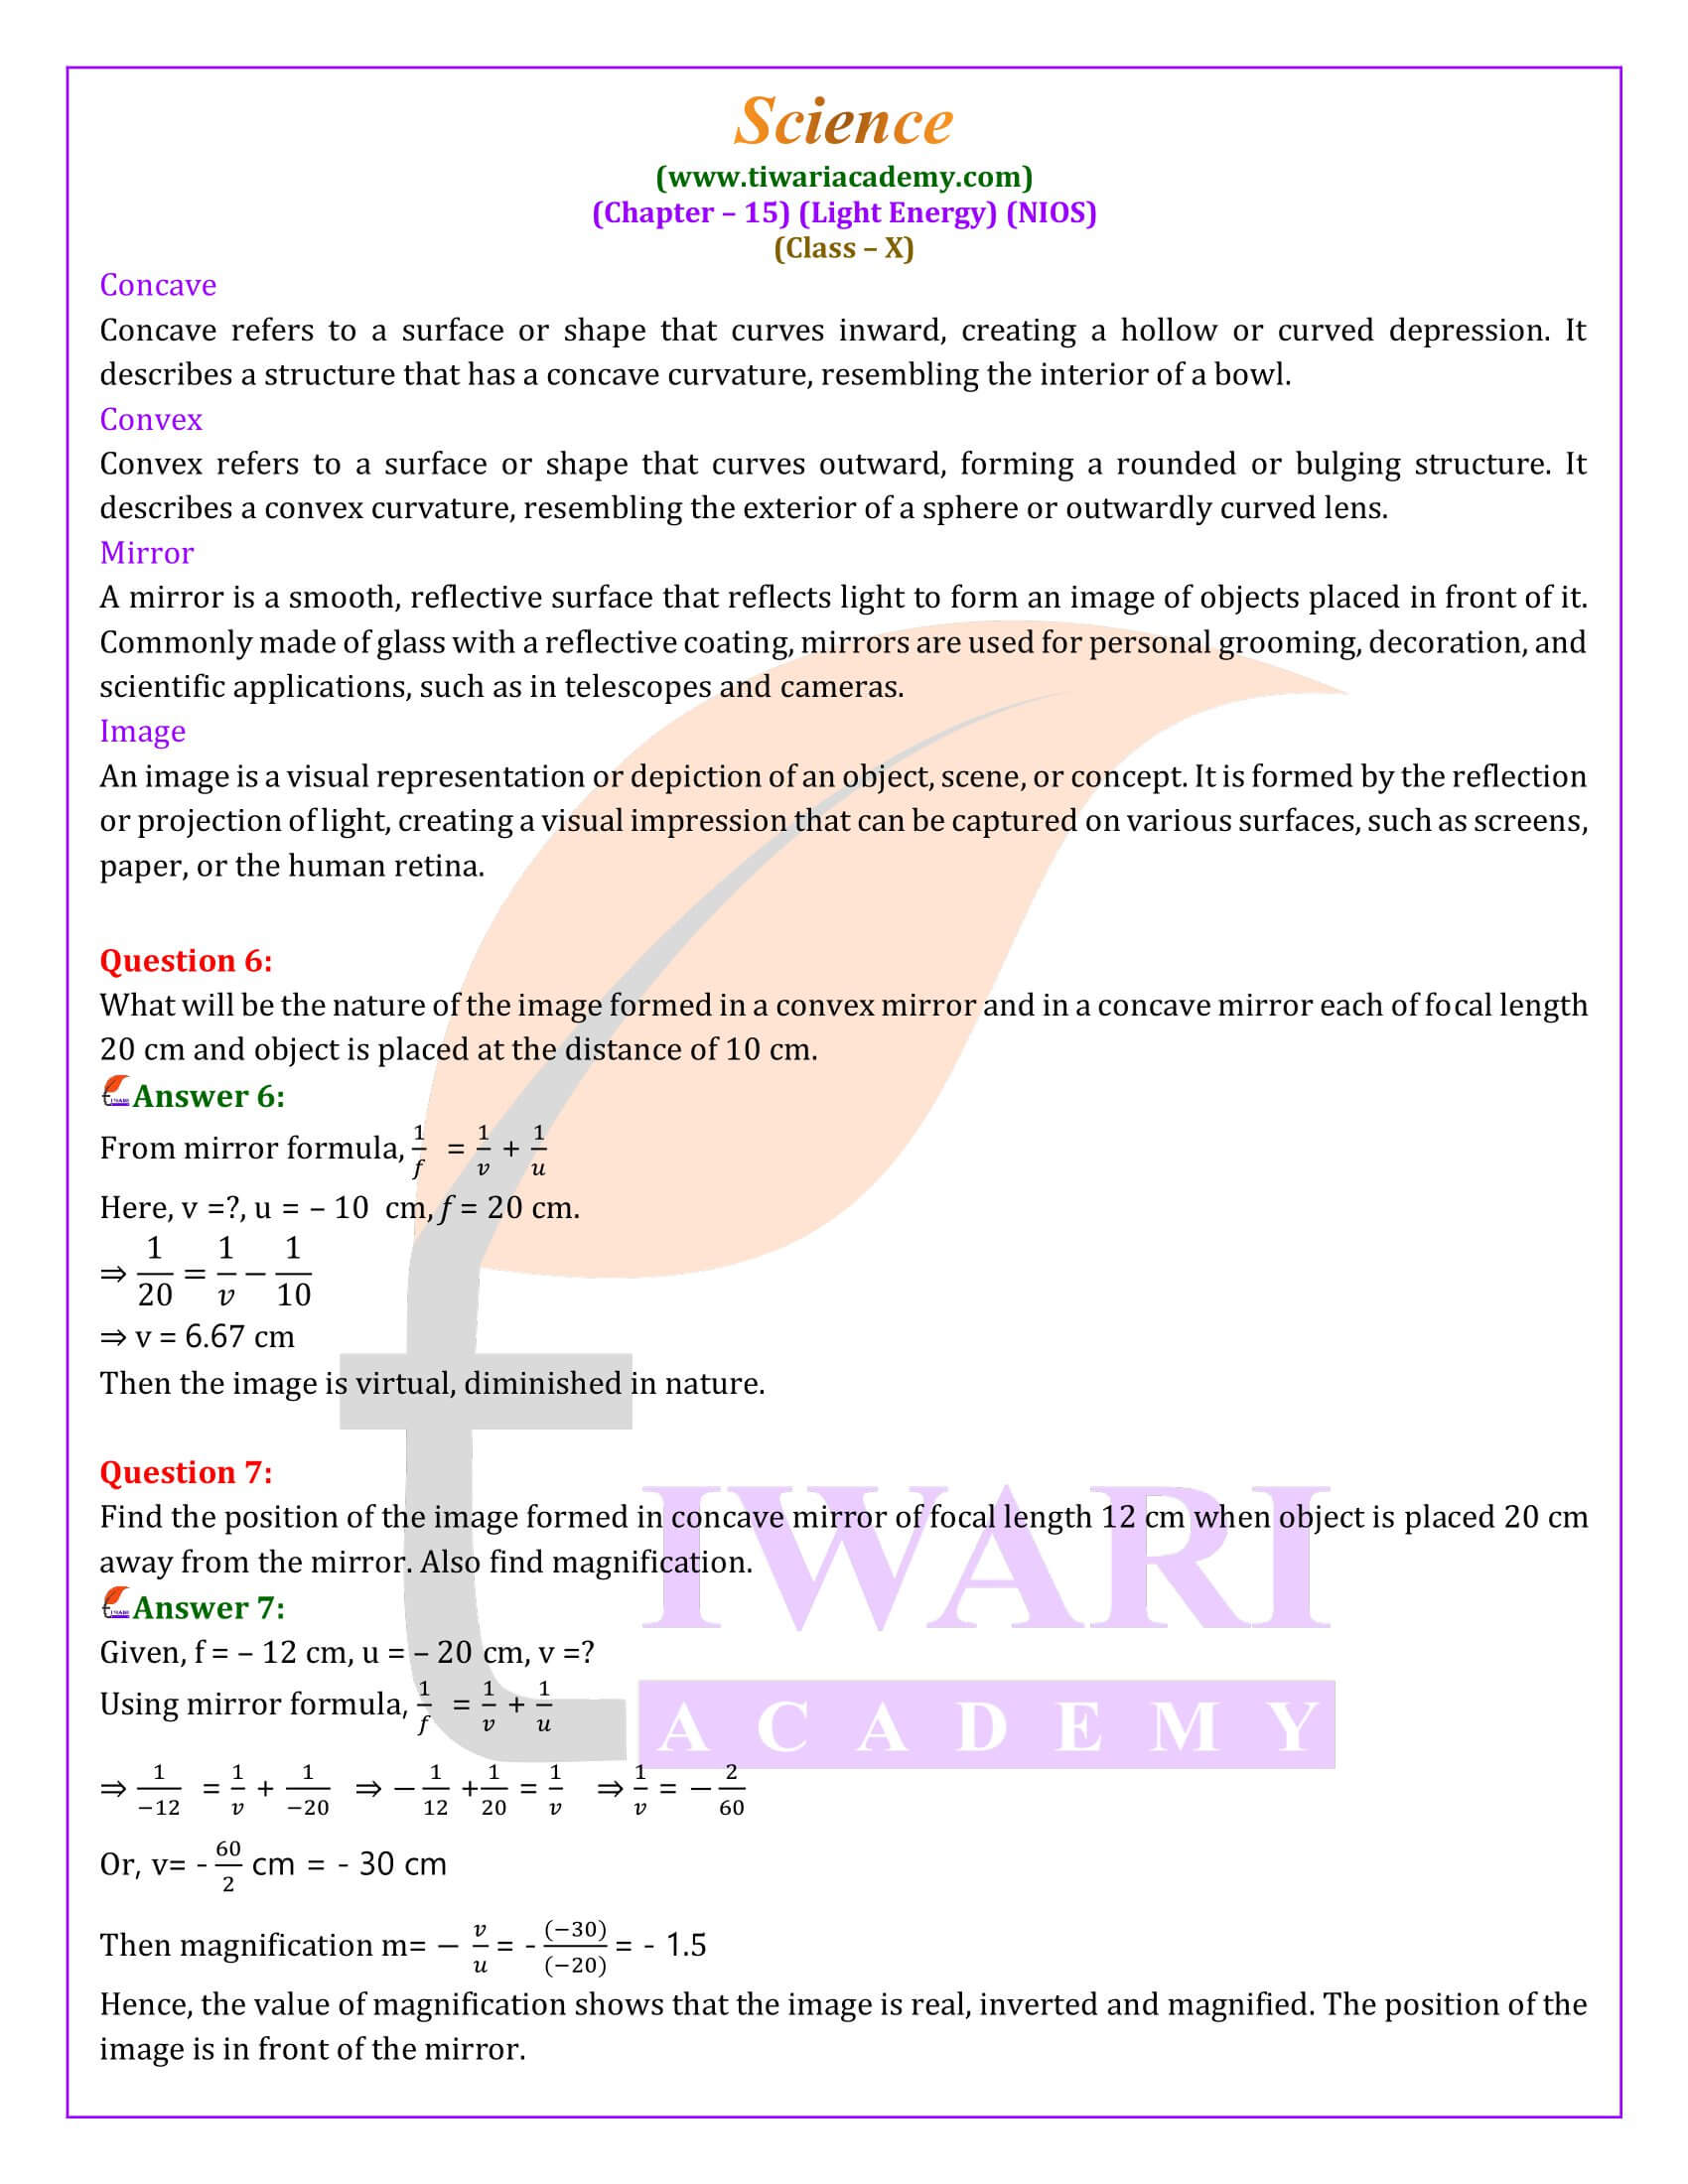 NIOS Class 10th Science Chapter 15 Question Answers